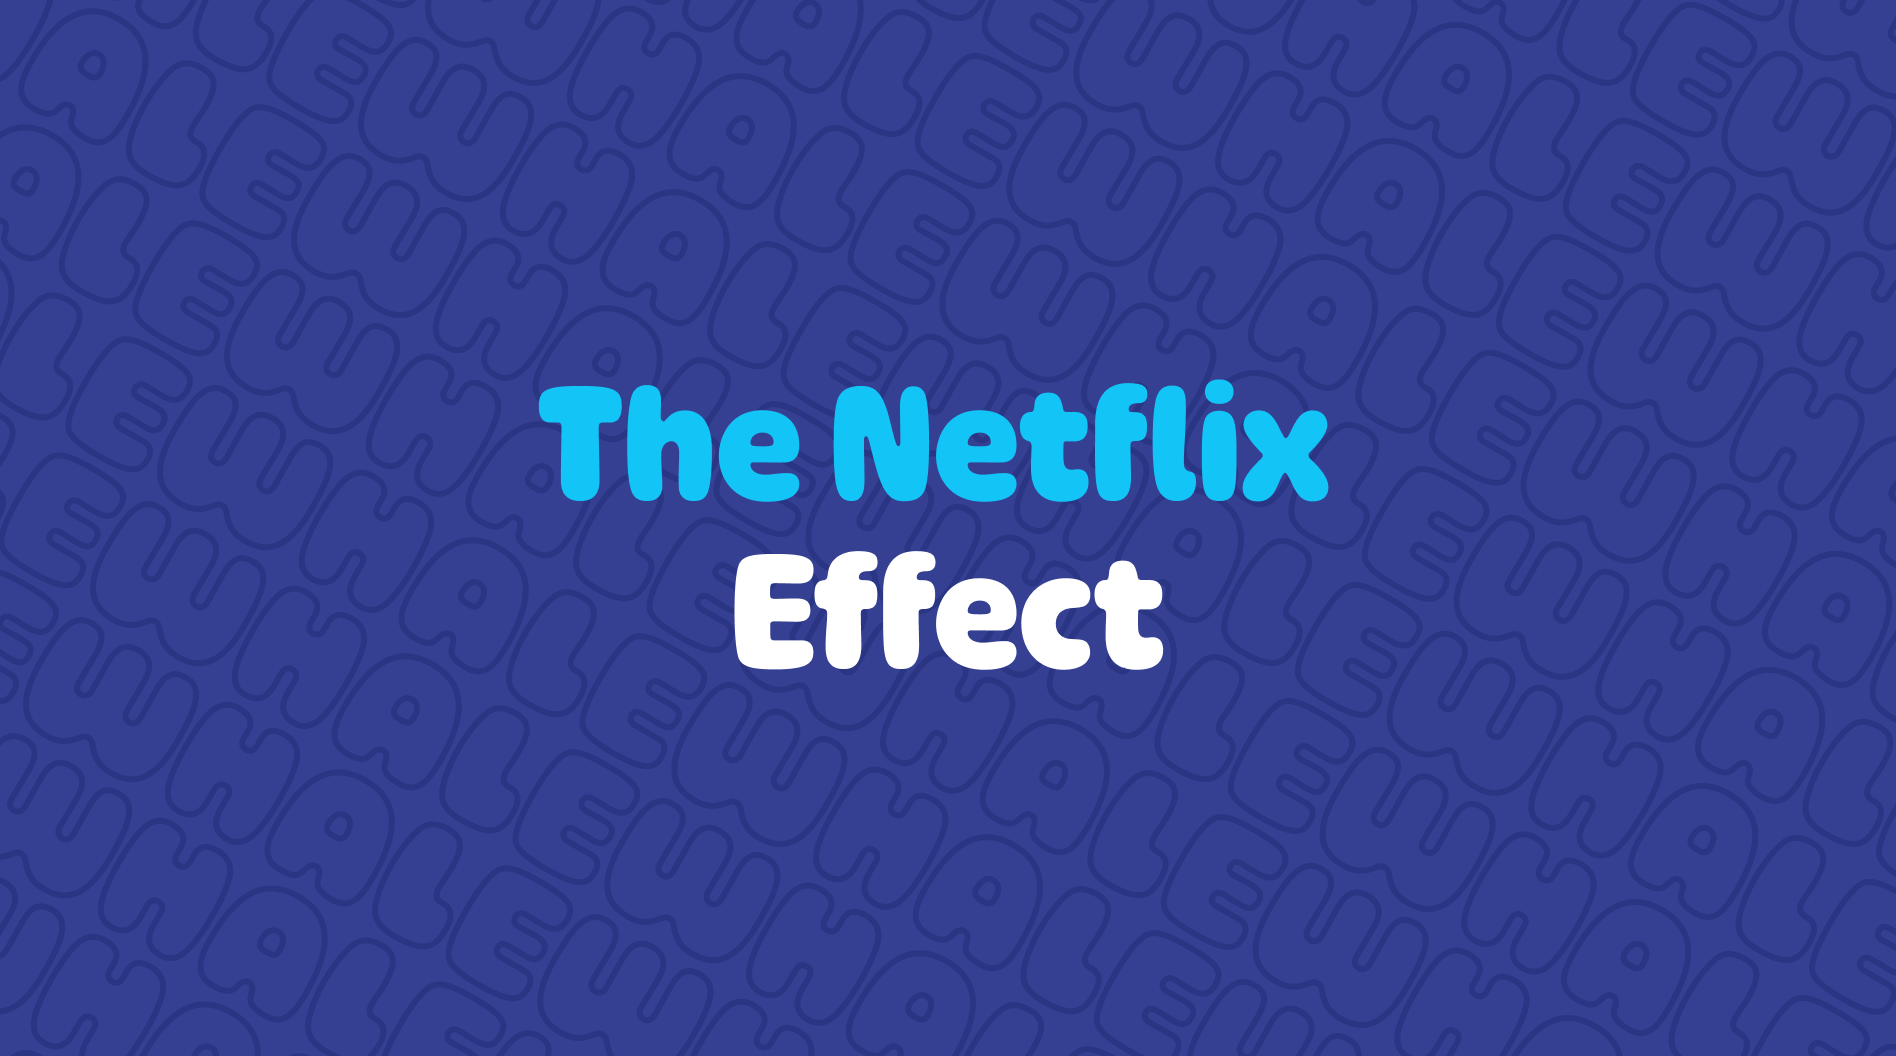 The Netflix Effect - Whale